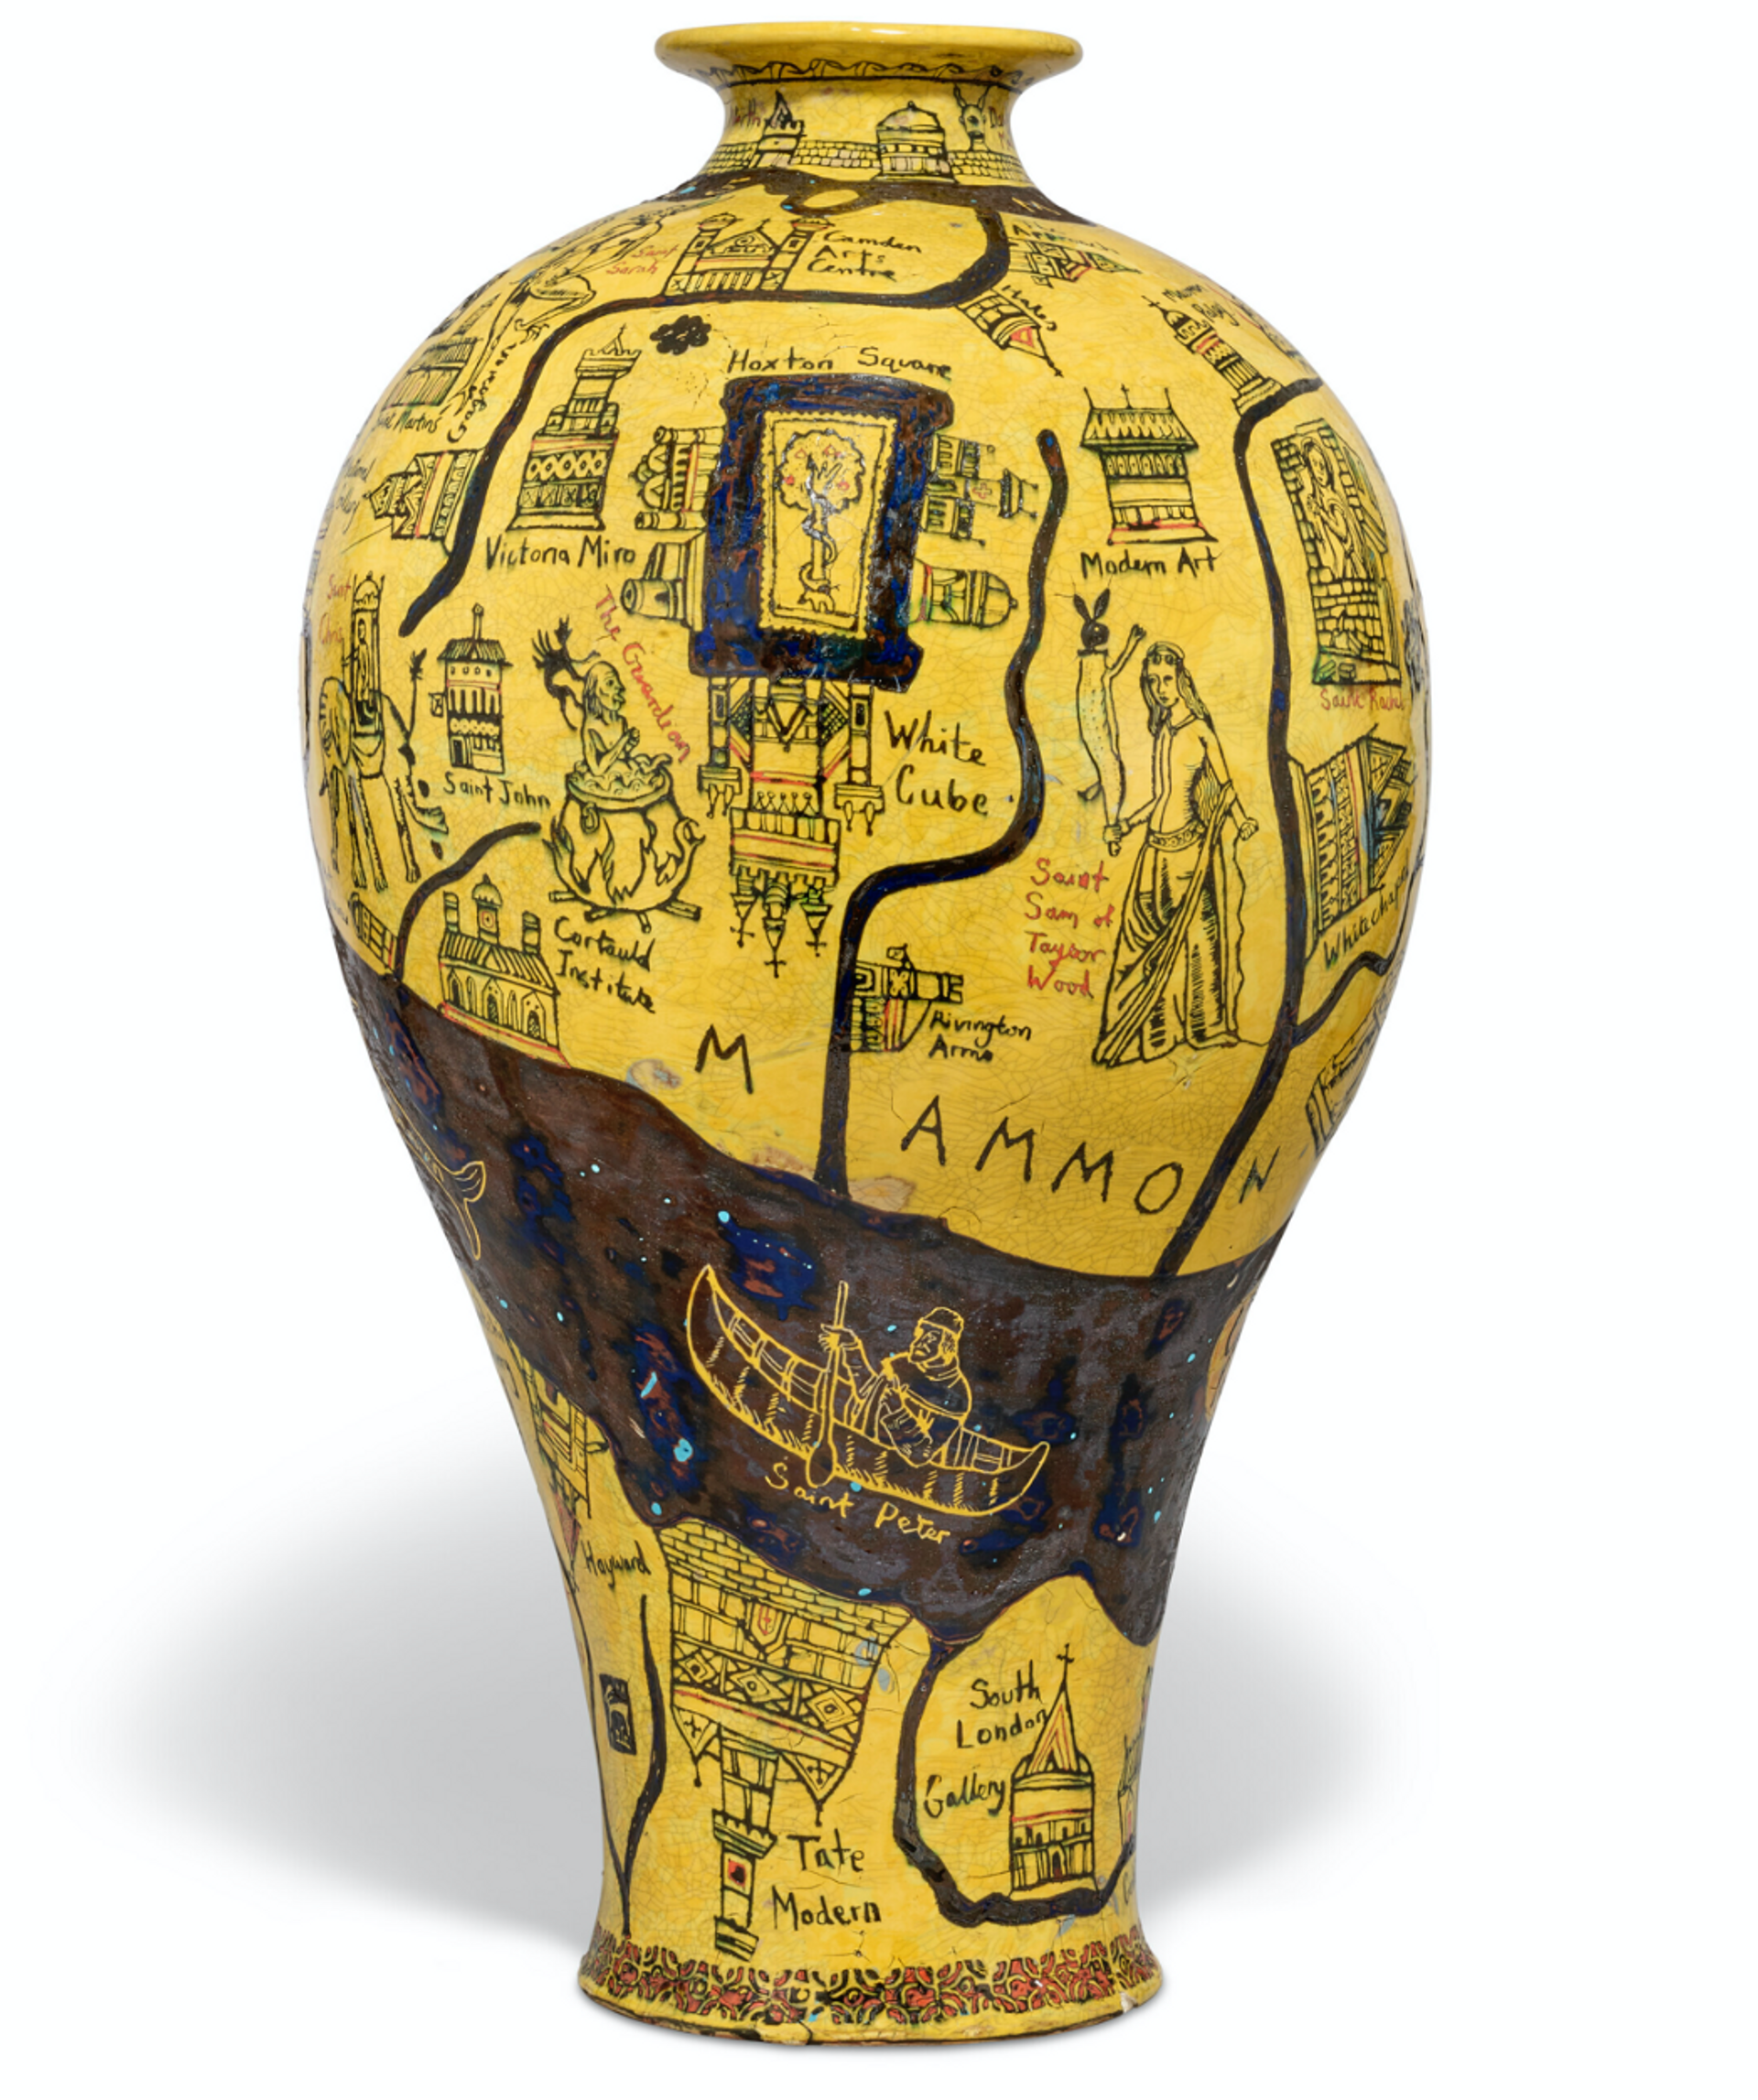 Balloon by Grayson Perry